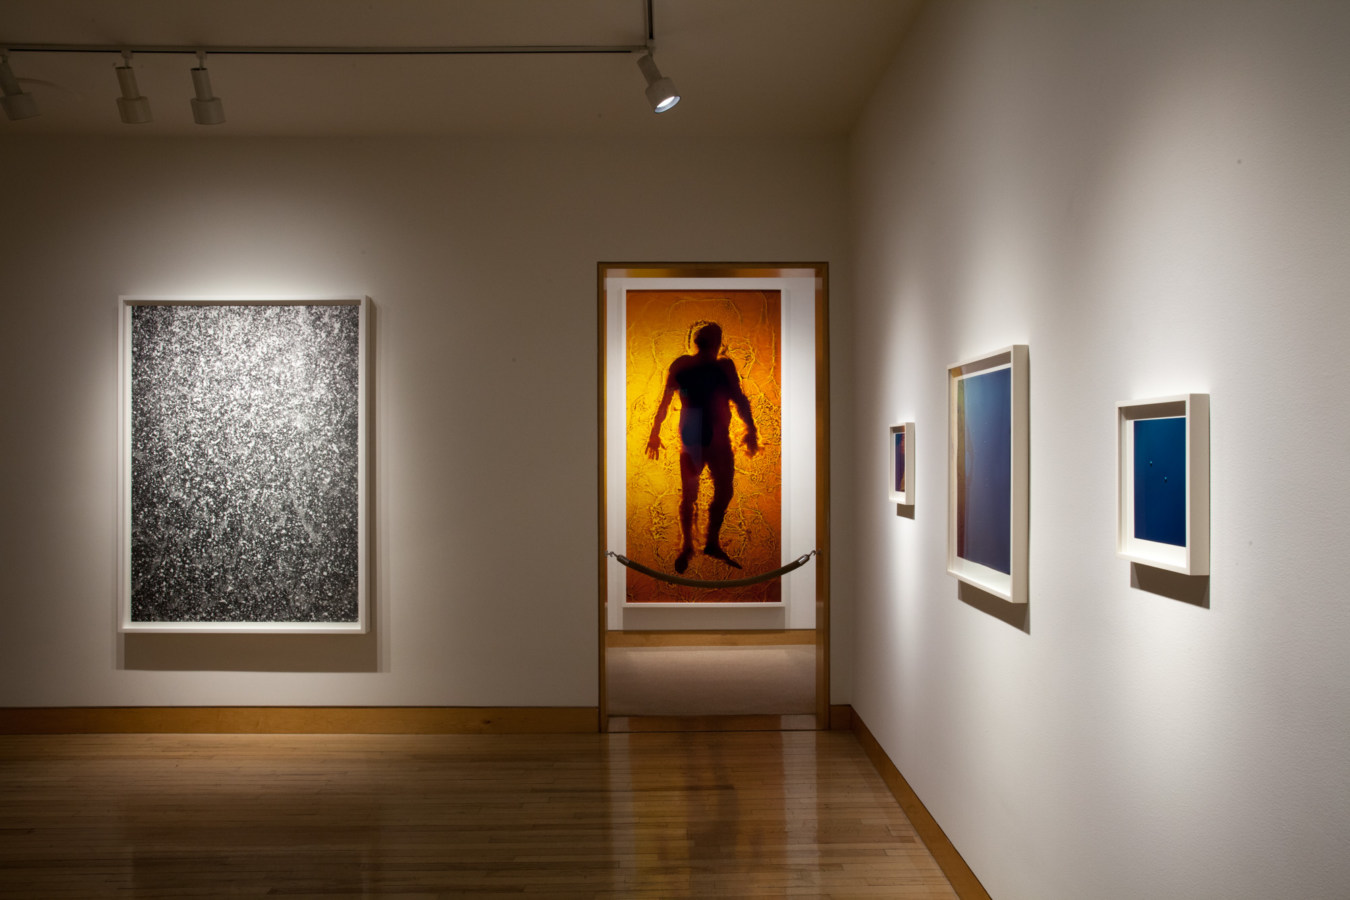 Color image of various sized color photographs on white gallery walls